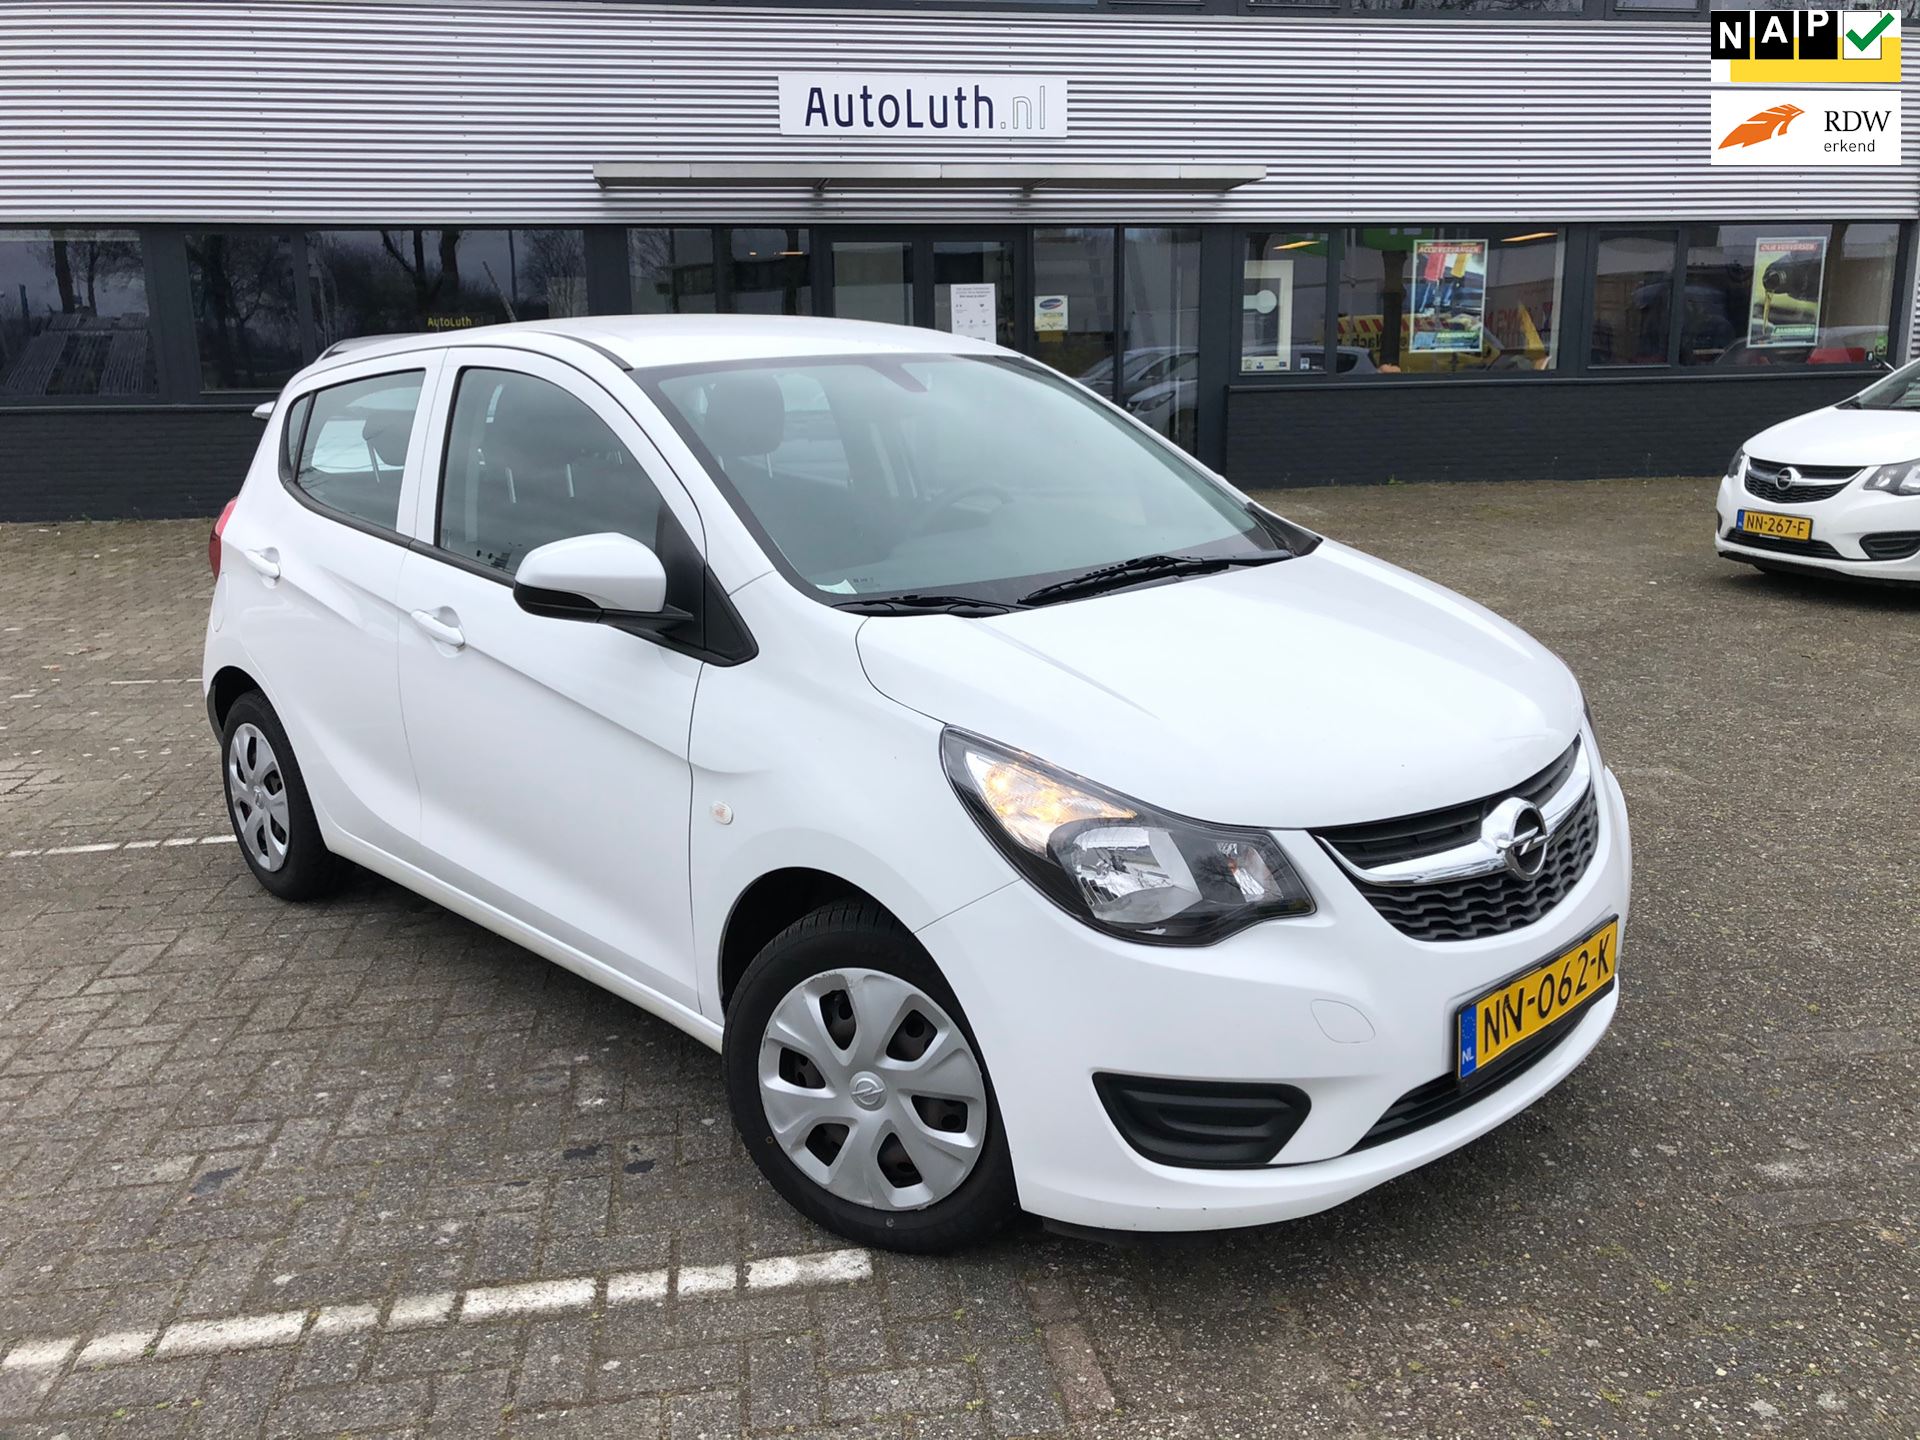 Opel KARL occasion - Luth BV